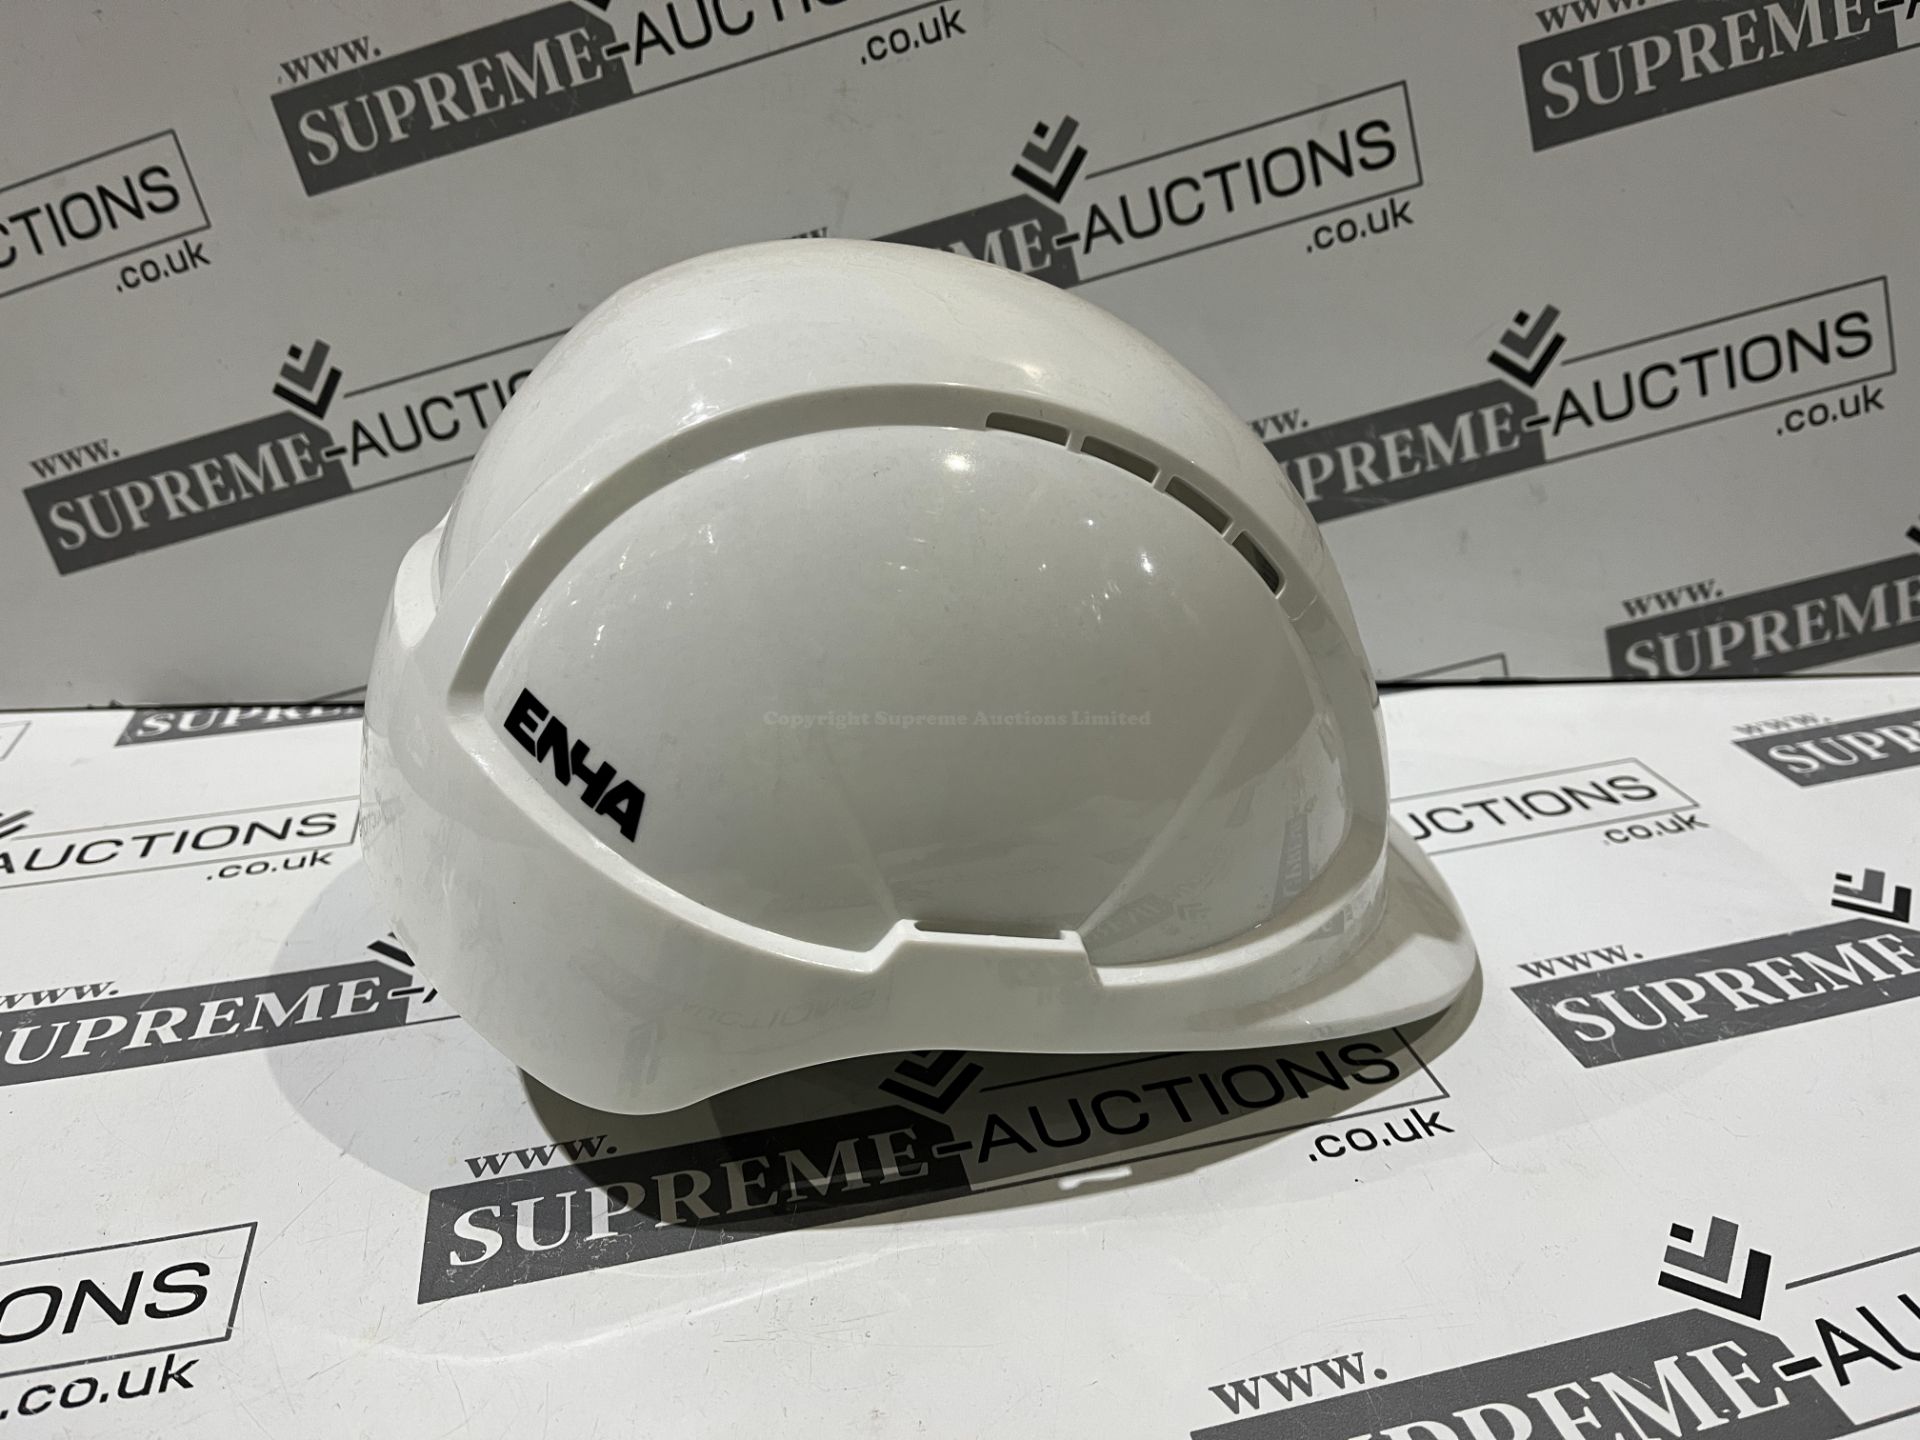 32 X BRAND NEW RED PROFESSIONAL HARD HATS R10-7